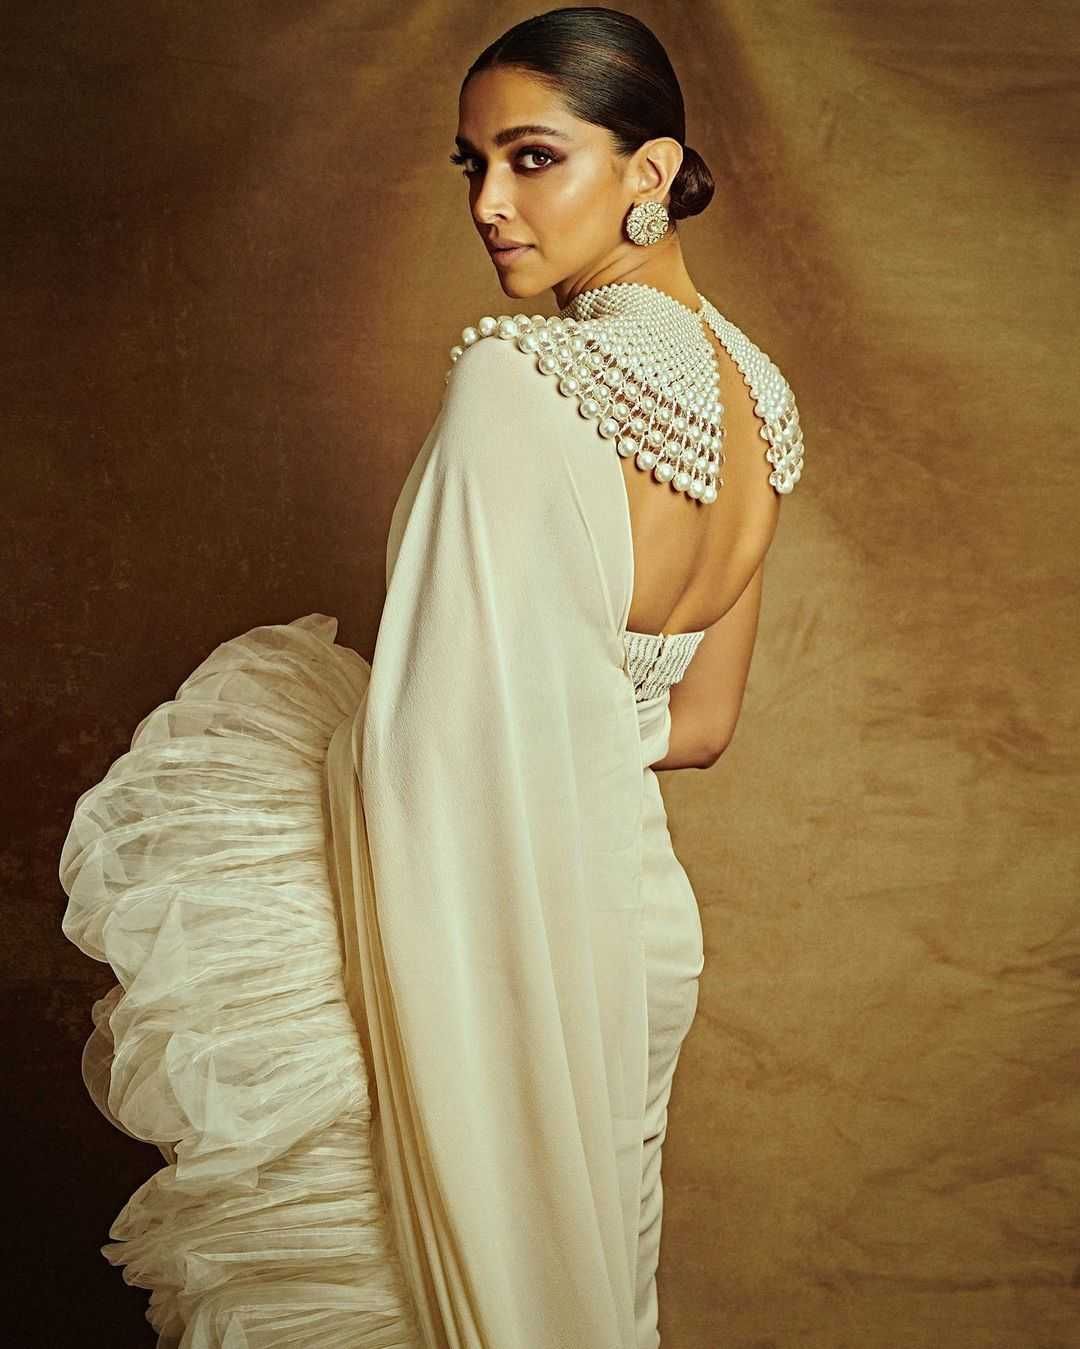 Deepika Padukone Looks Simply Gorgeous in a White Gown as She Poses  Alongside Rami Malek and Yasmine Sabri at Madrid's Cartier Event